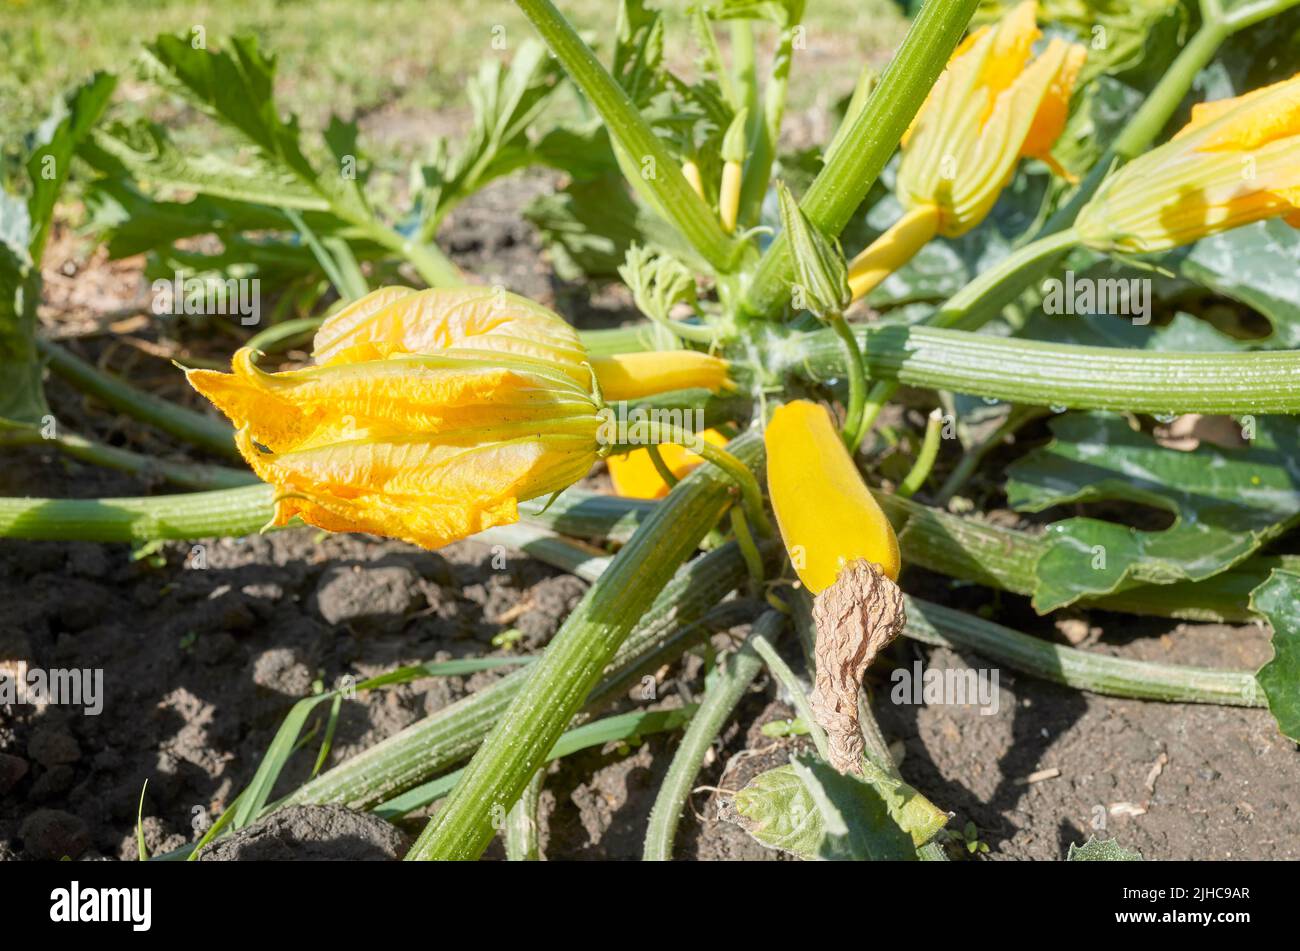 Organic golden zucchini plant with flower and fruit, selective focus. Stock Photo